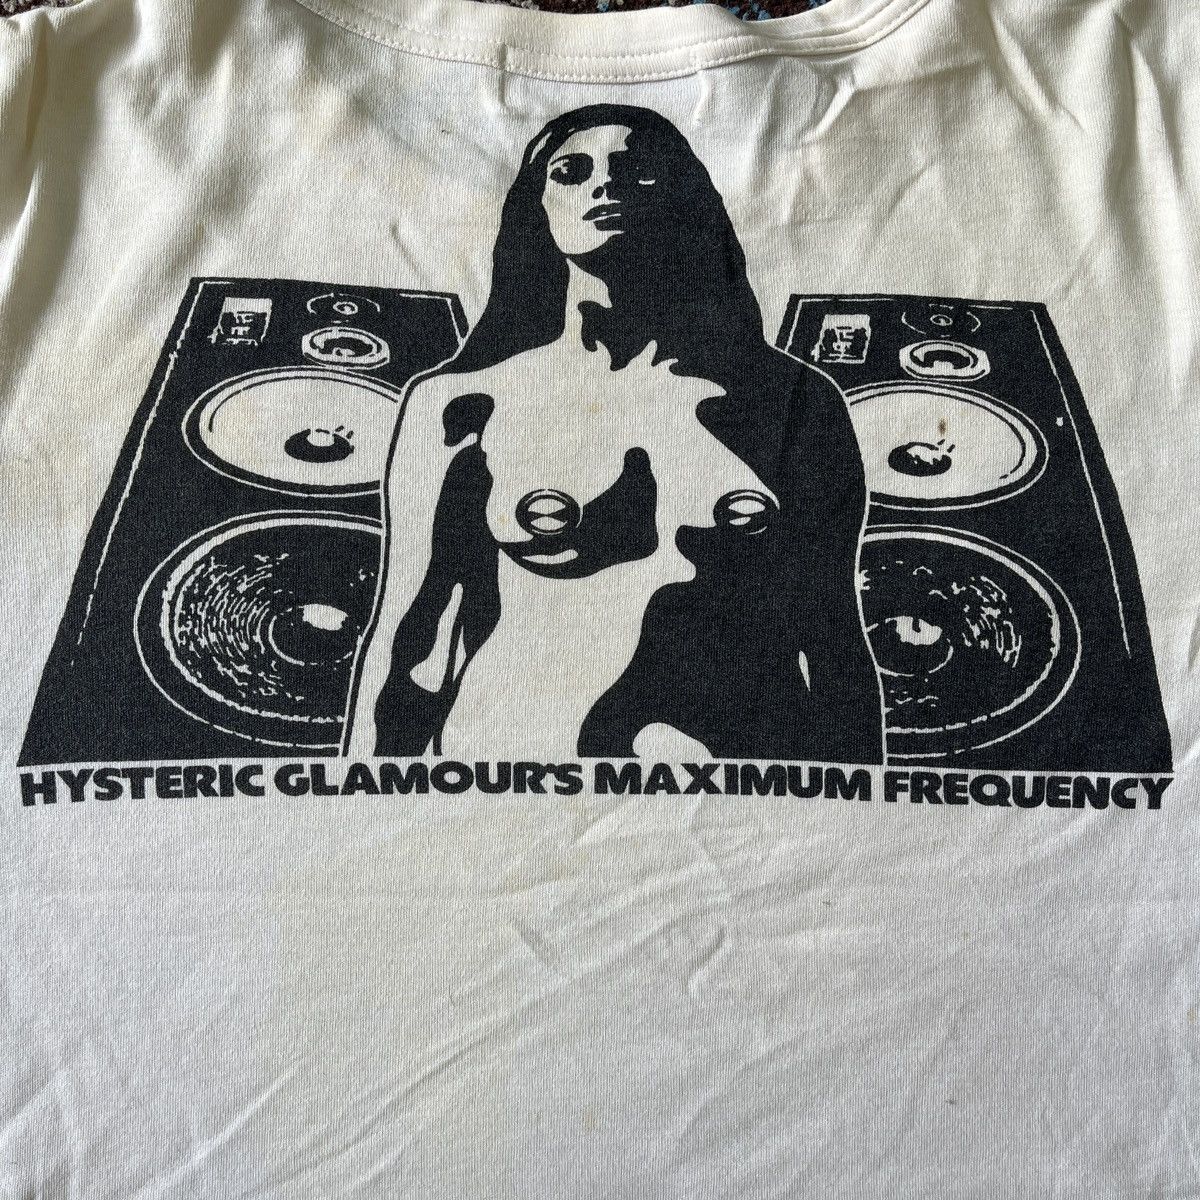 Vintage Hysteric Glamour Maximum Frequency - 15